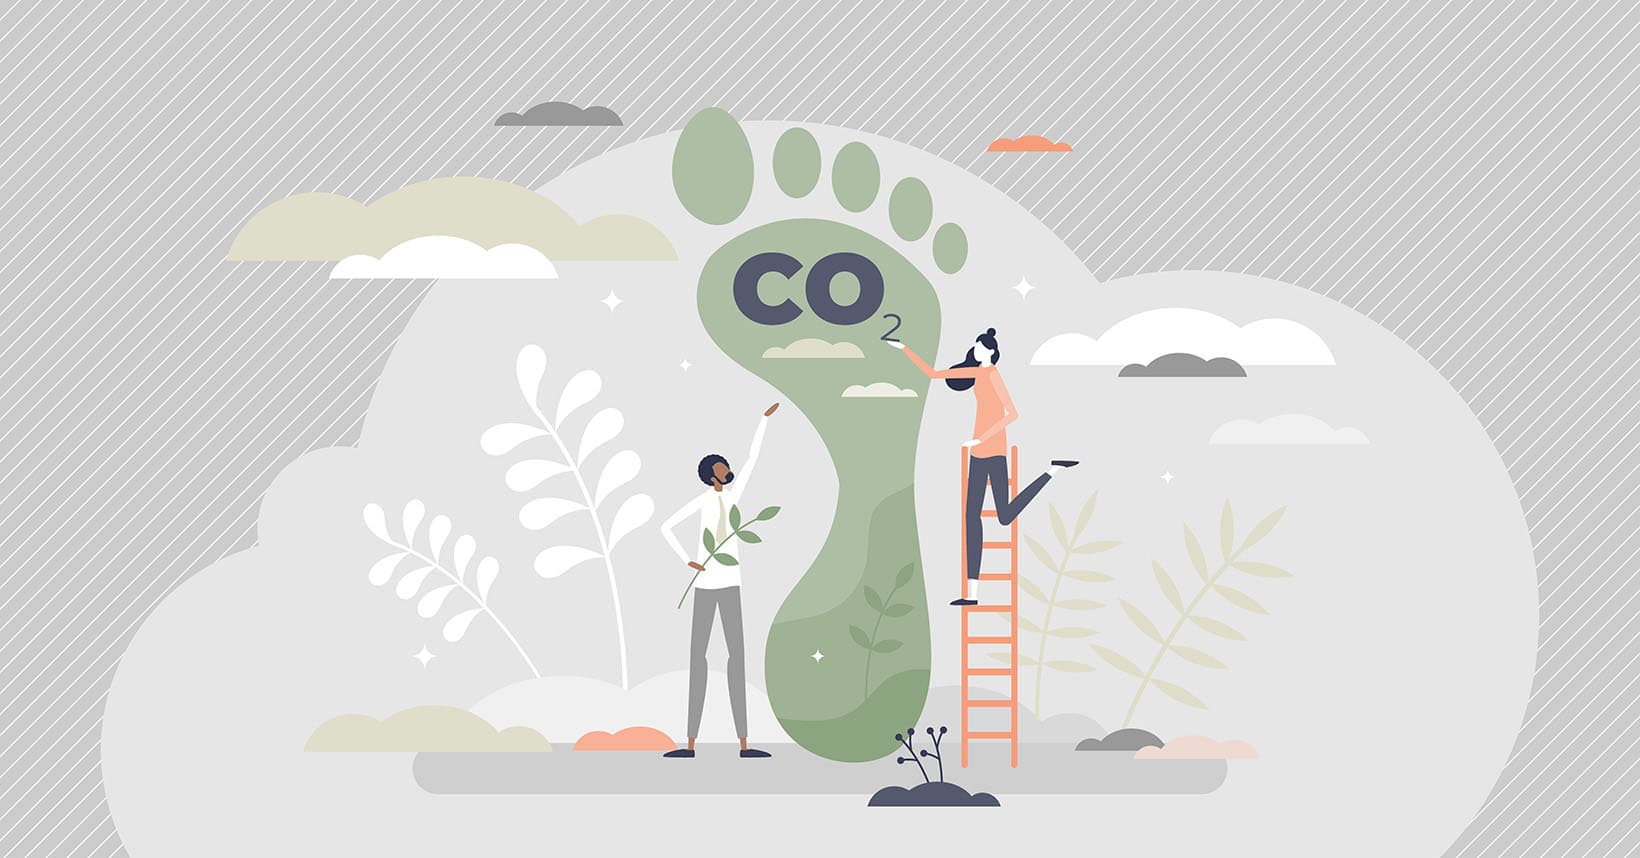 Illustration of 2 people next to a green foot